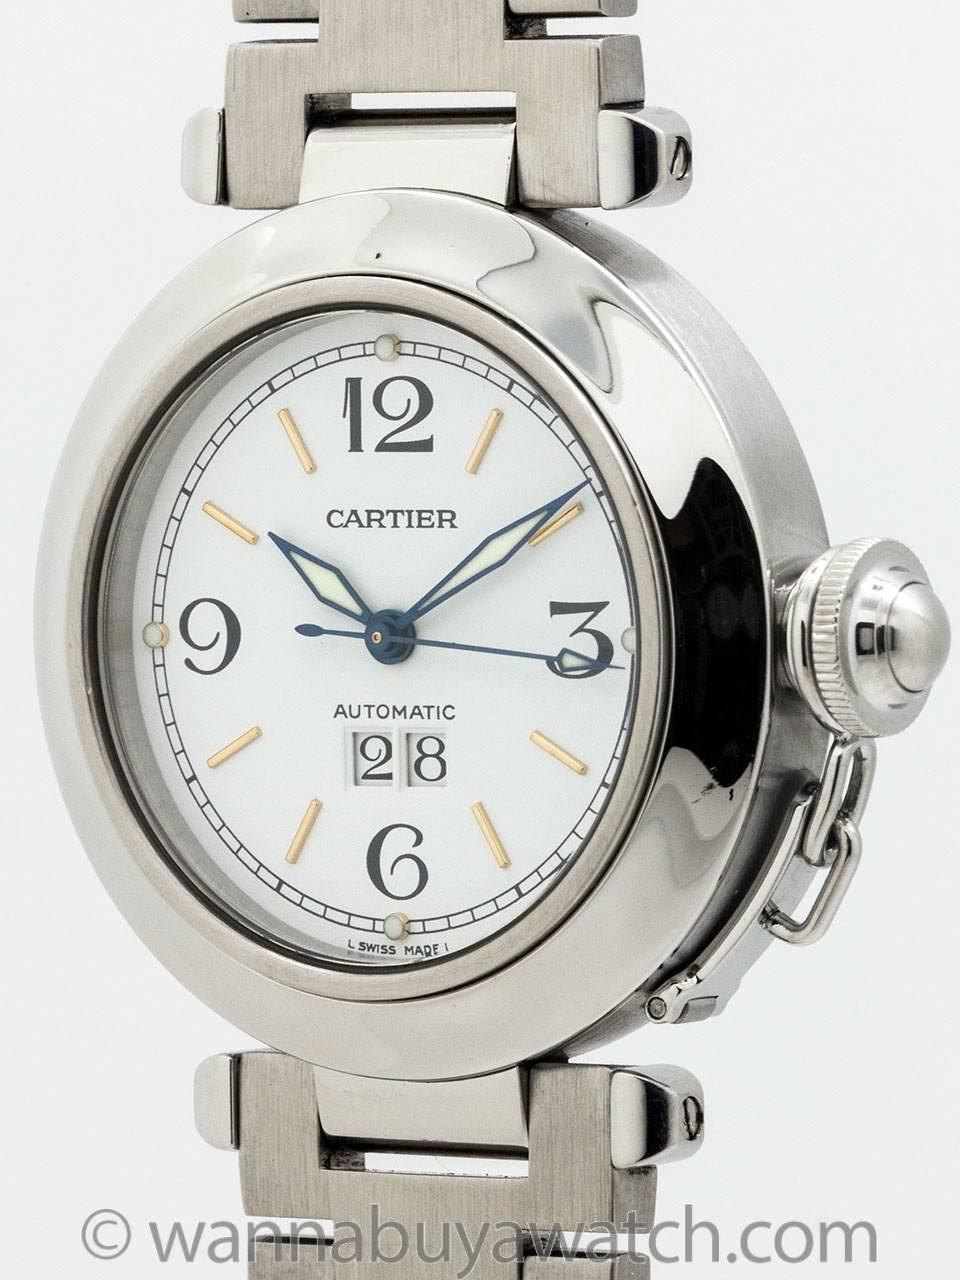 
Cartier Stainless Steel Pasha C ref 2475 circa 200s. 35.5 x 42 diameter case with smooth bezel, sapphire crystal and stainless steel screw down canteen style crown protector. Featuring original white dial with large black numerals and indexes,